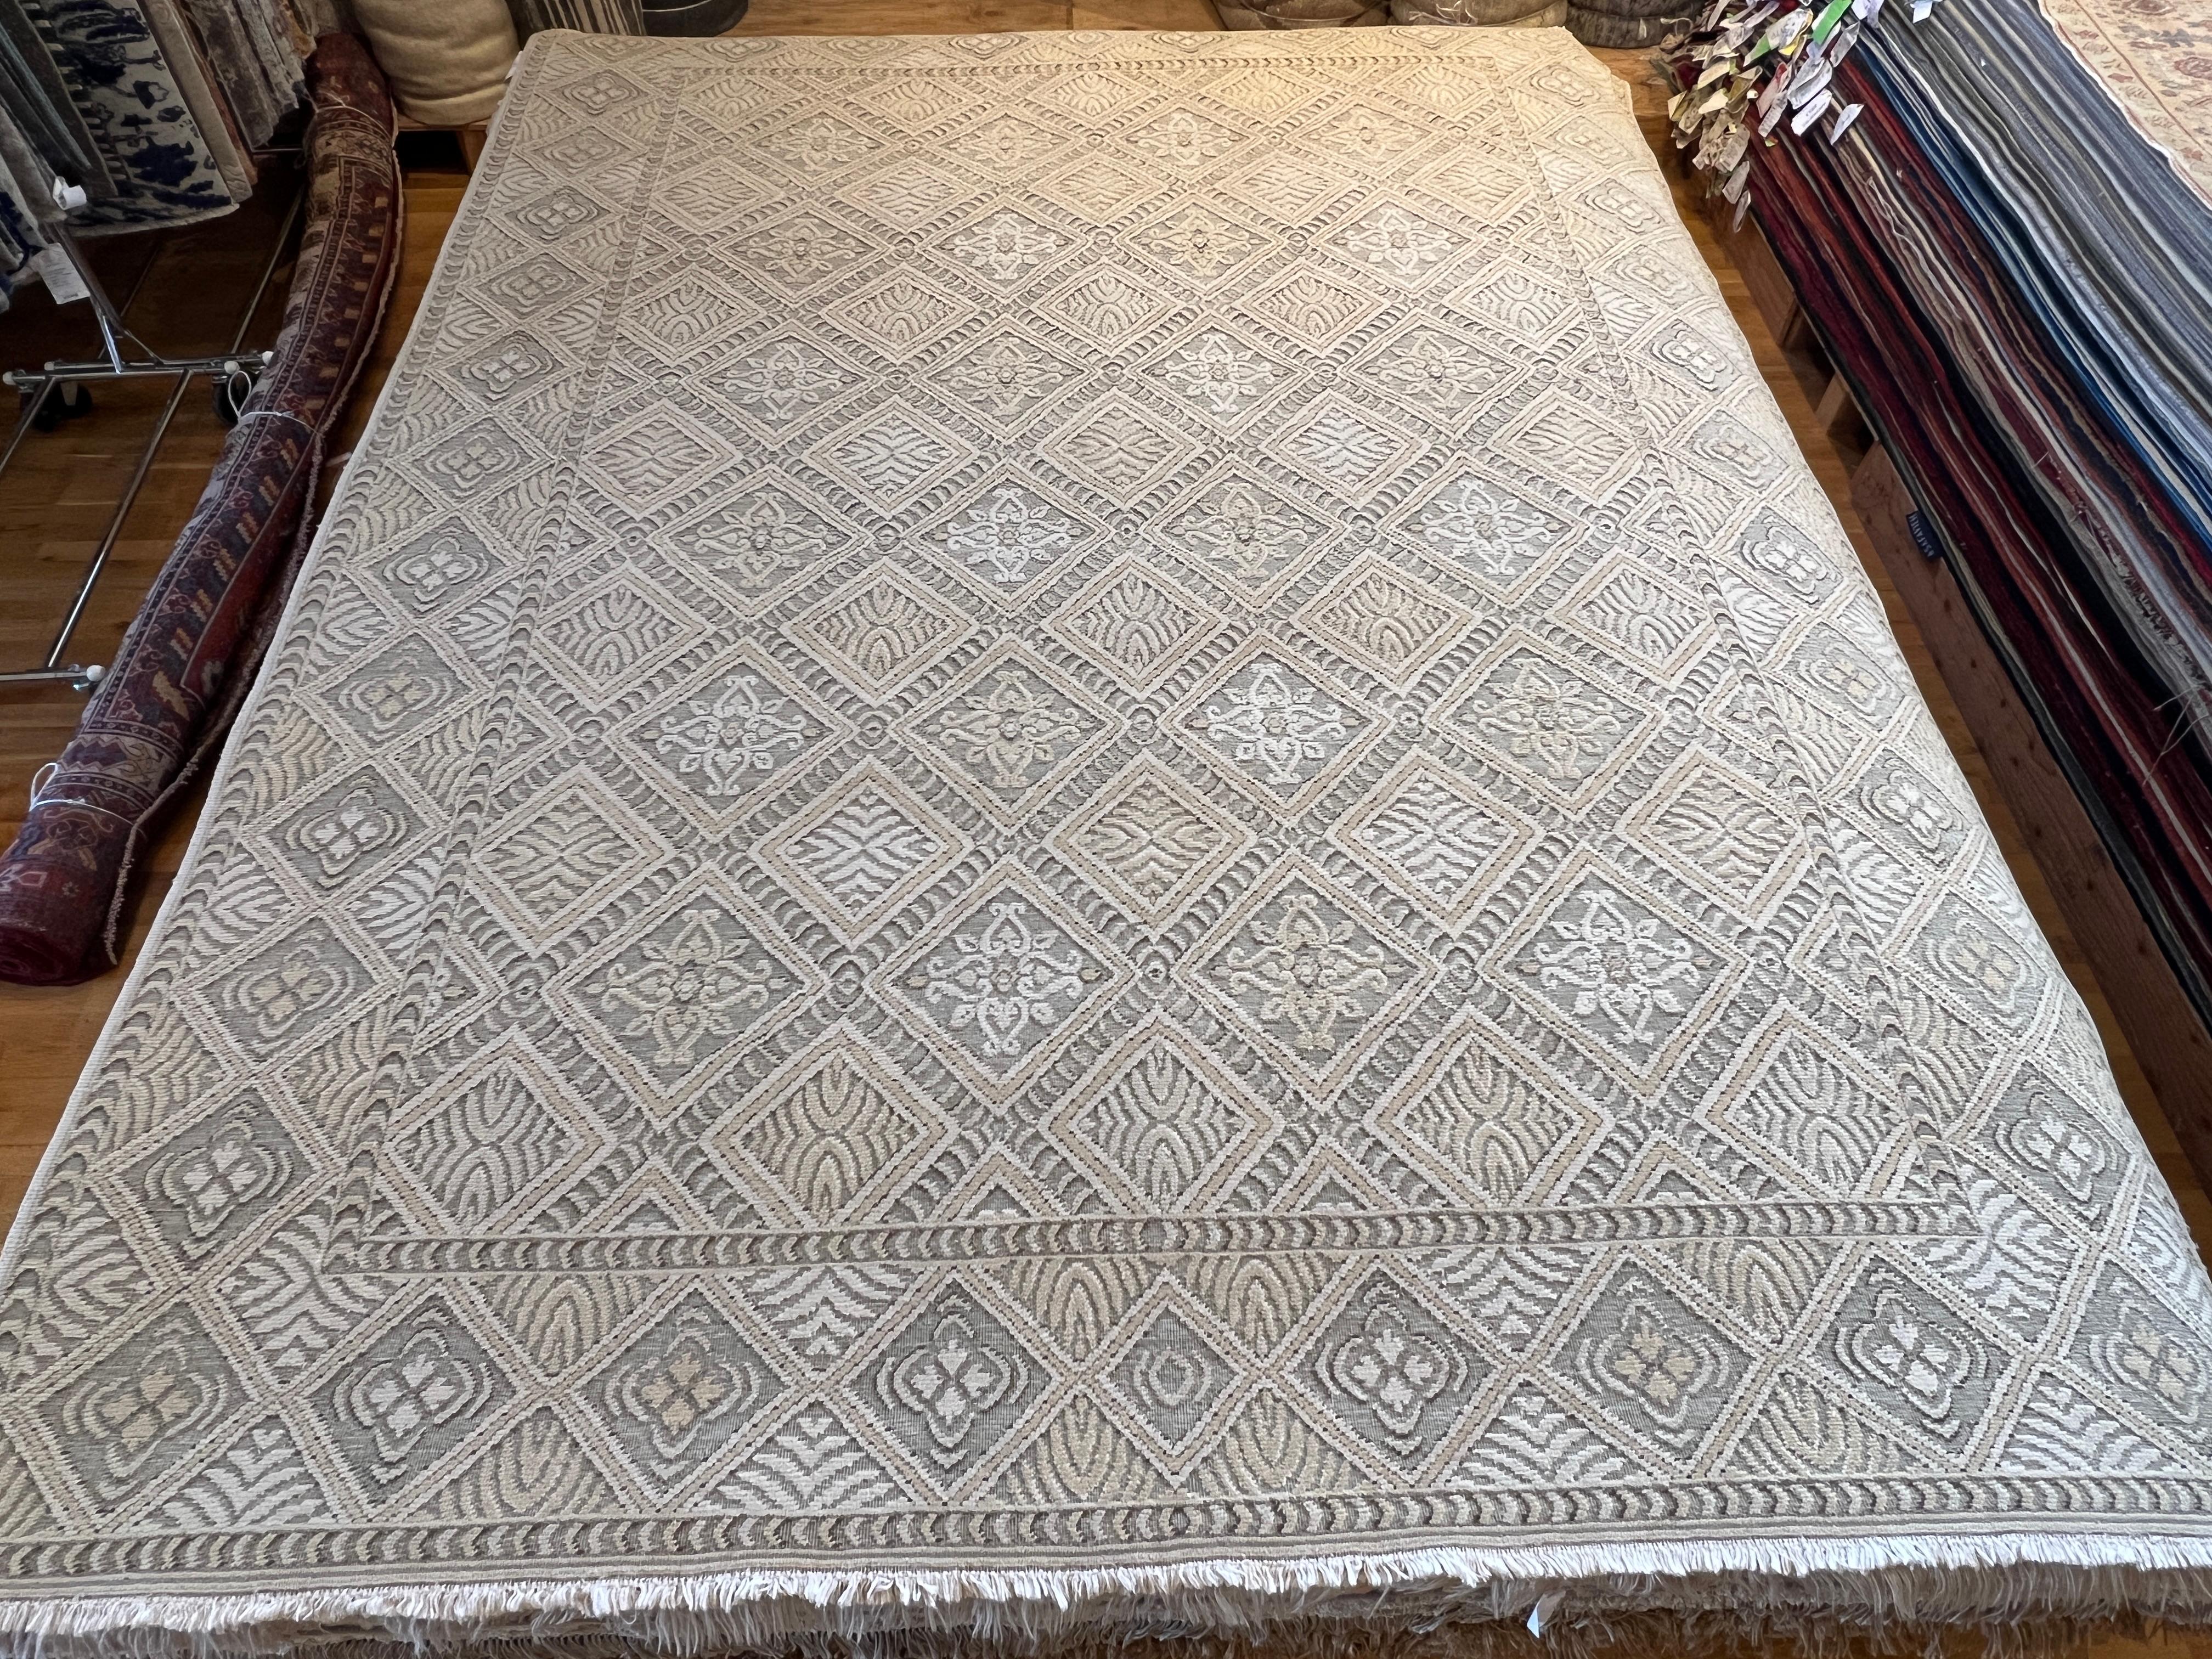 Romanian 9'x12' French Floral Inspired Hand-Knotted Wool Rug For Sale